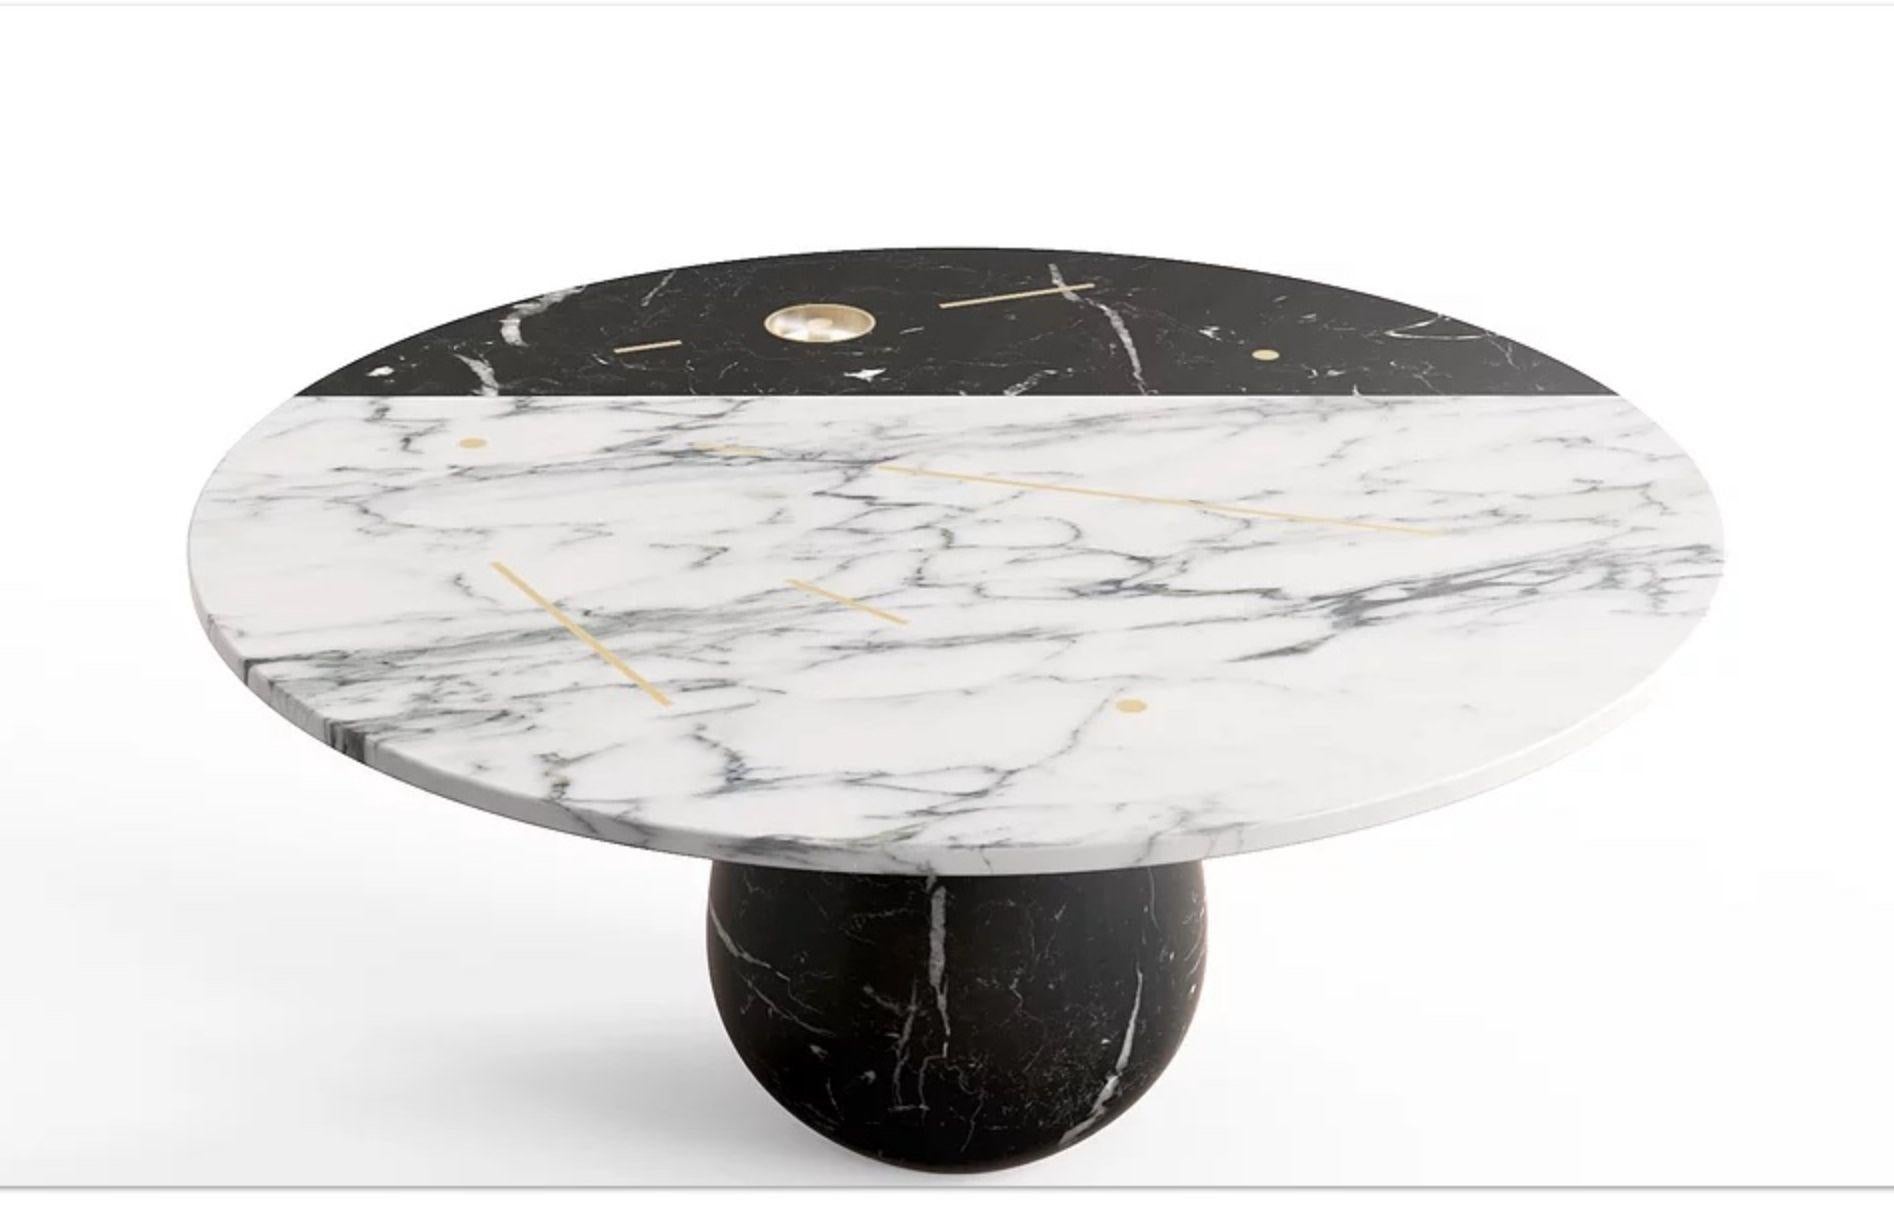 Stilla marble table by Marmi Serafini
Materials: Nero Marquinia, Arabescato Carrara, brass, resin
Dimensions: Ø 160, H 75 cm



Stilla is a round table which top, embroidered by simple and geometrical features, gives life to an elegant